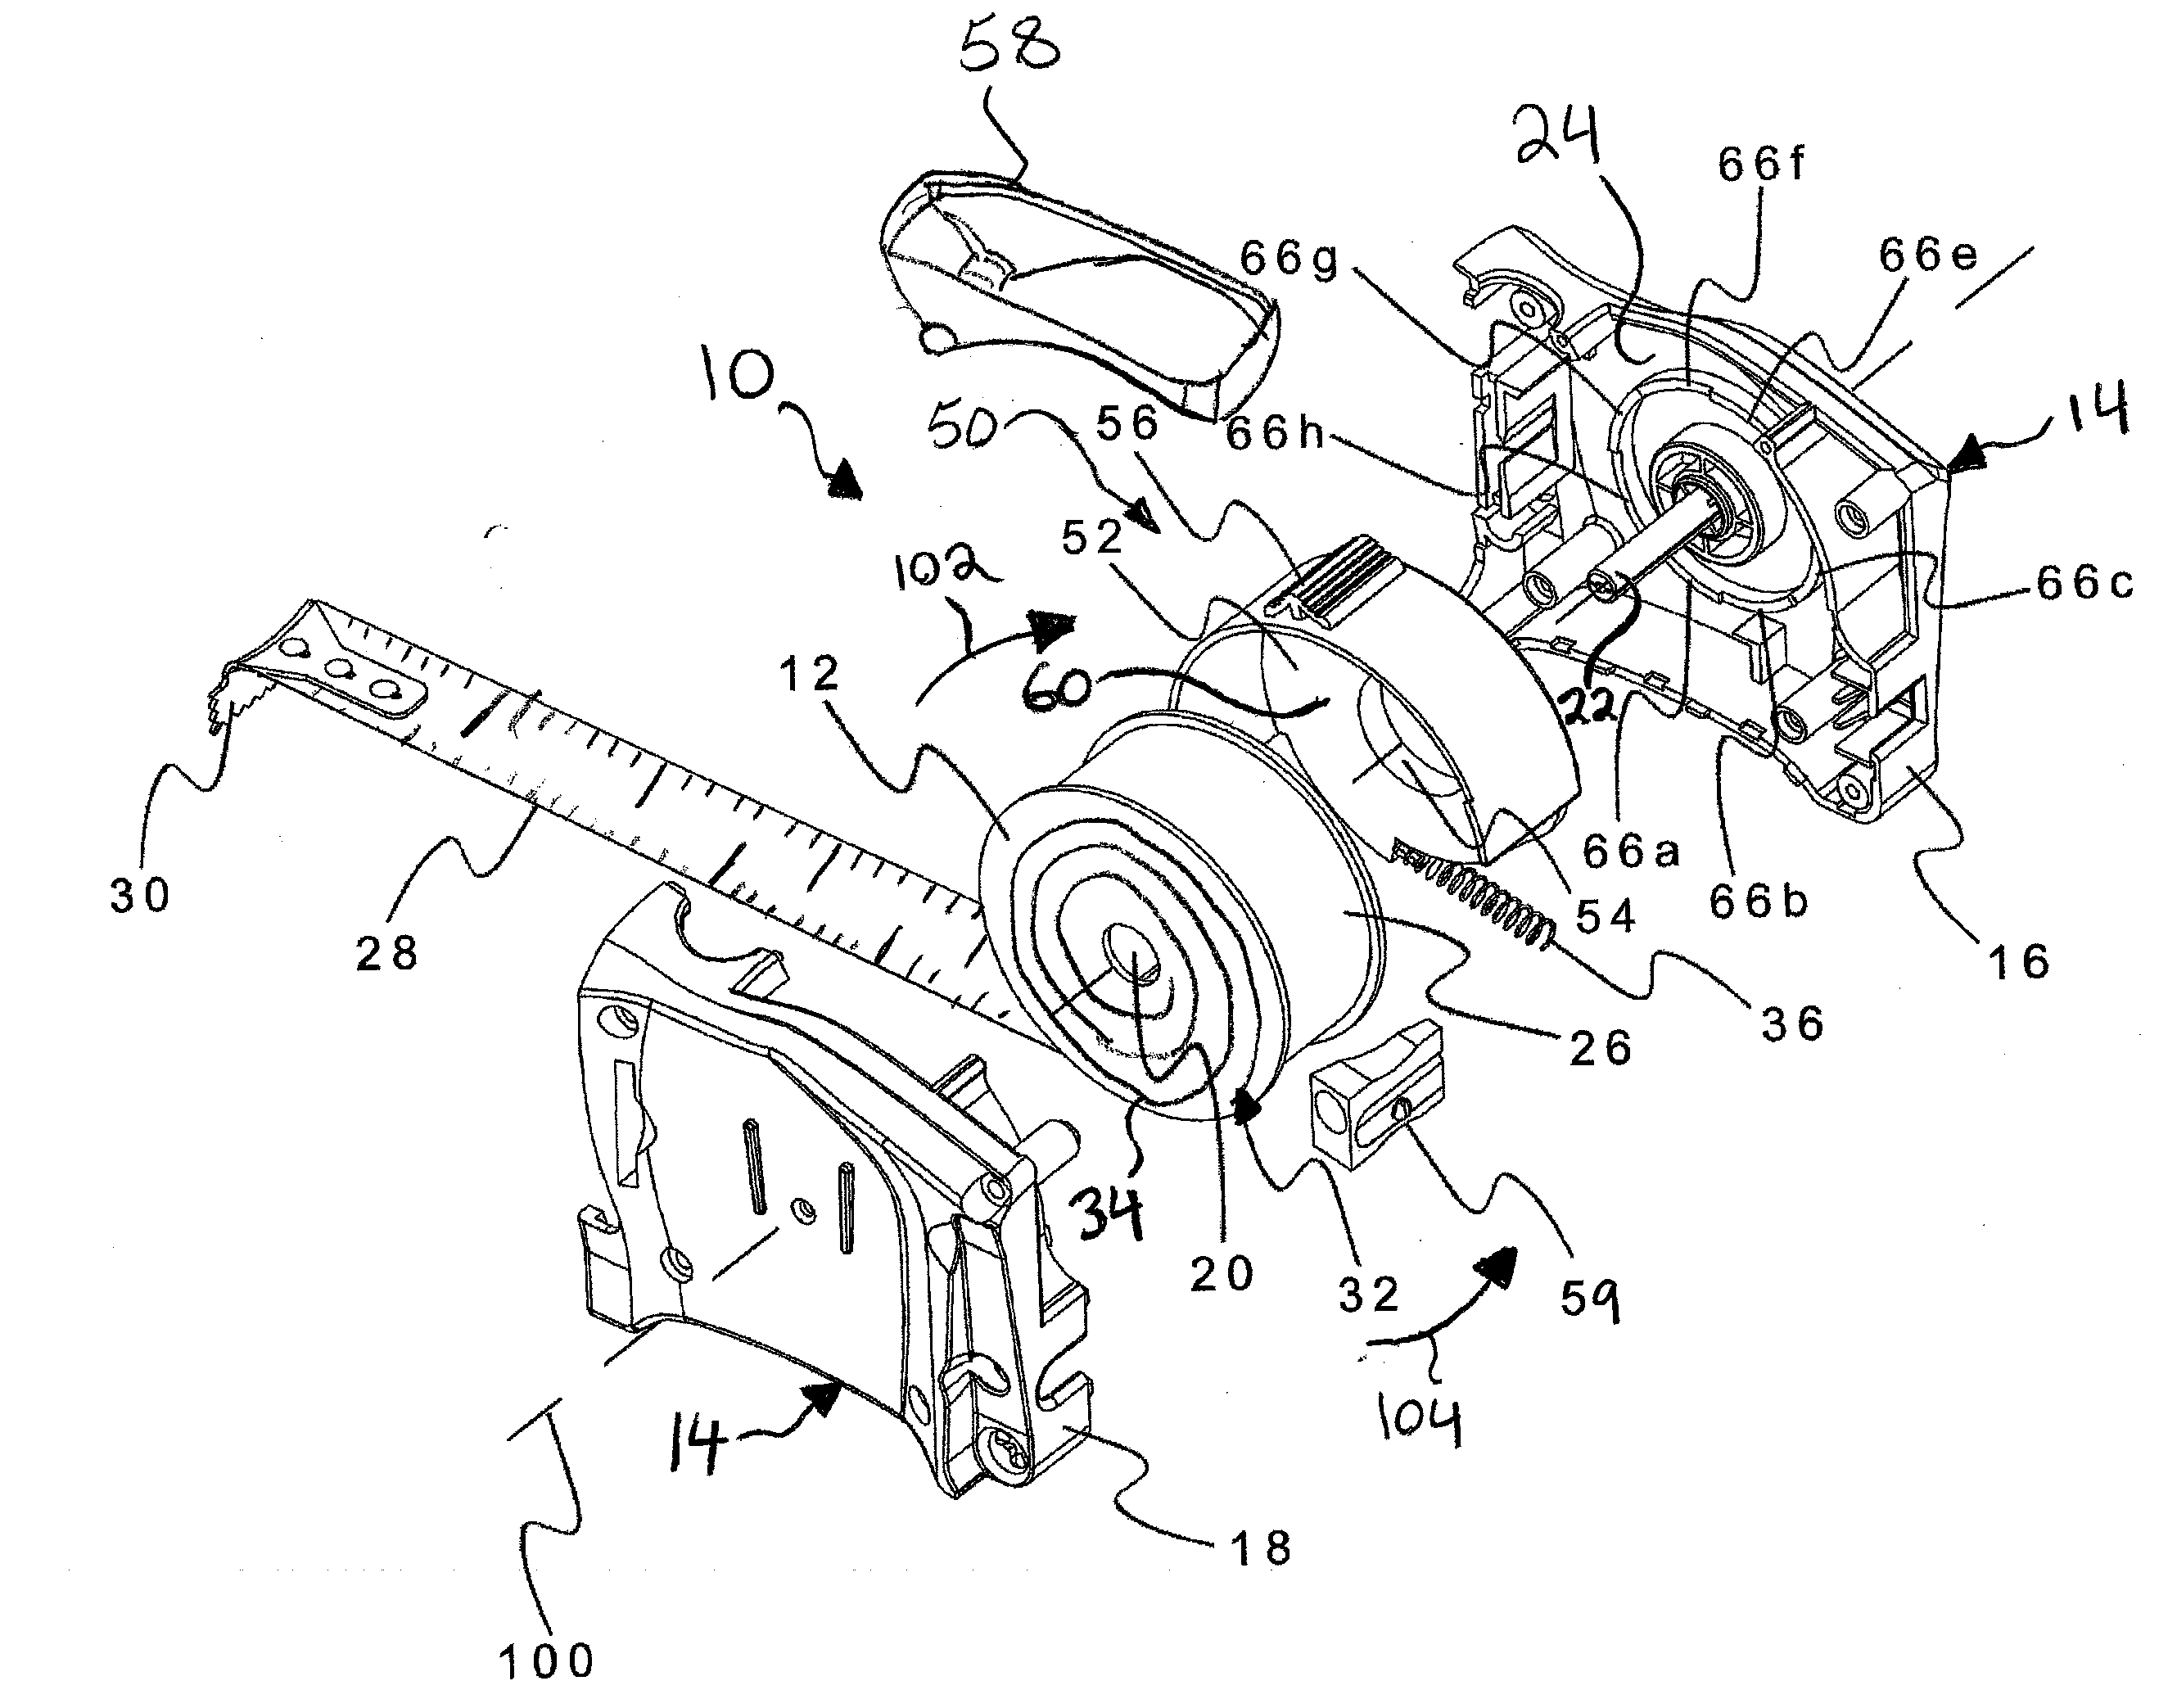 Disc brake for a tape measure